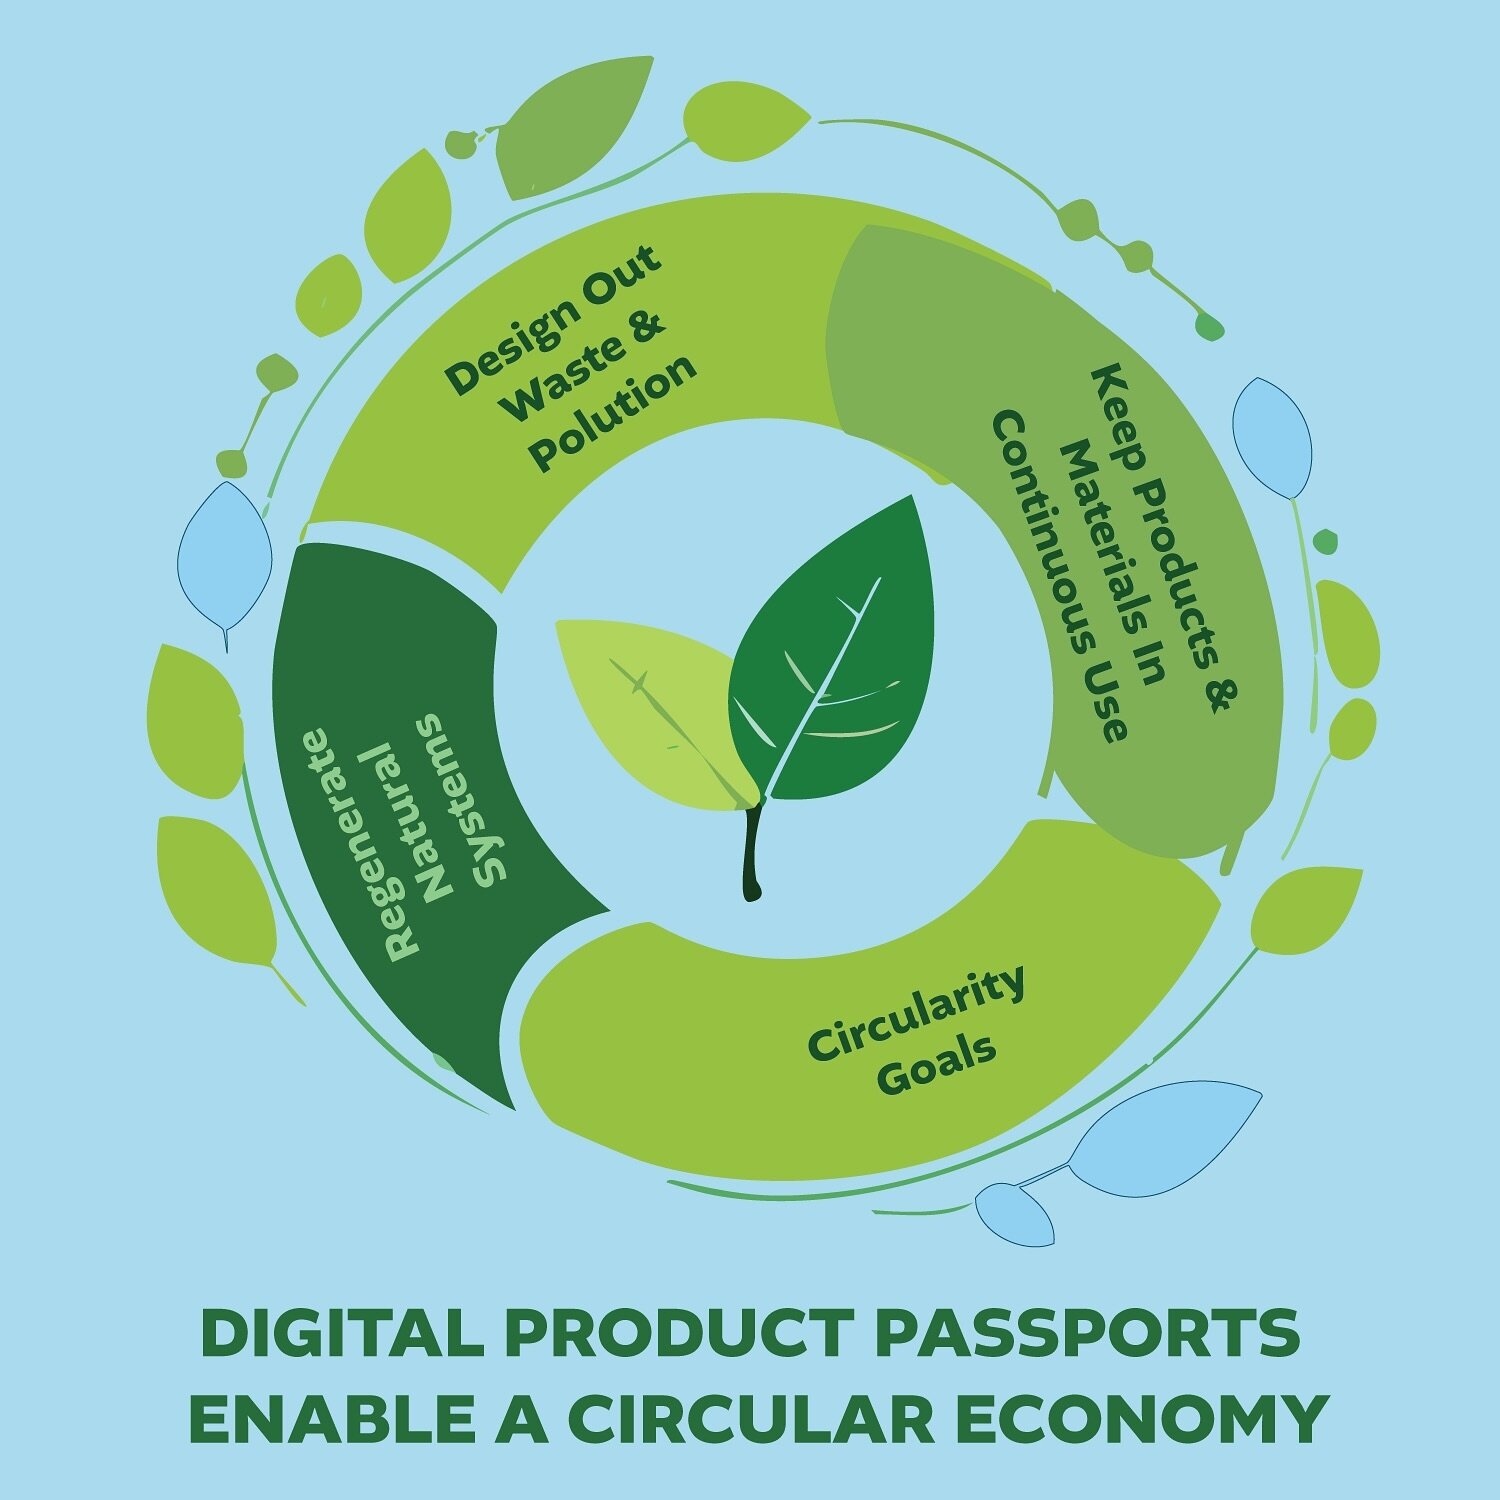 THIS IS HOW DIGITAL PRODUCT PASSPORTS ENABLE CIRCULARITY

#cotton #IndianCotton #weave3
#design #makers #crafts #india 
#supplychains #supplychain #supplychange 
#rawmaterials #sustainability 
#CircularEconomy #CircularDesign #CircularEducation #Reso